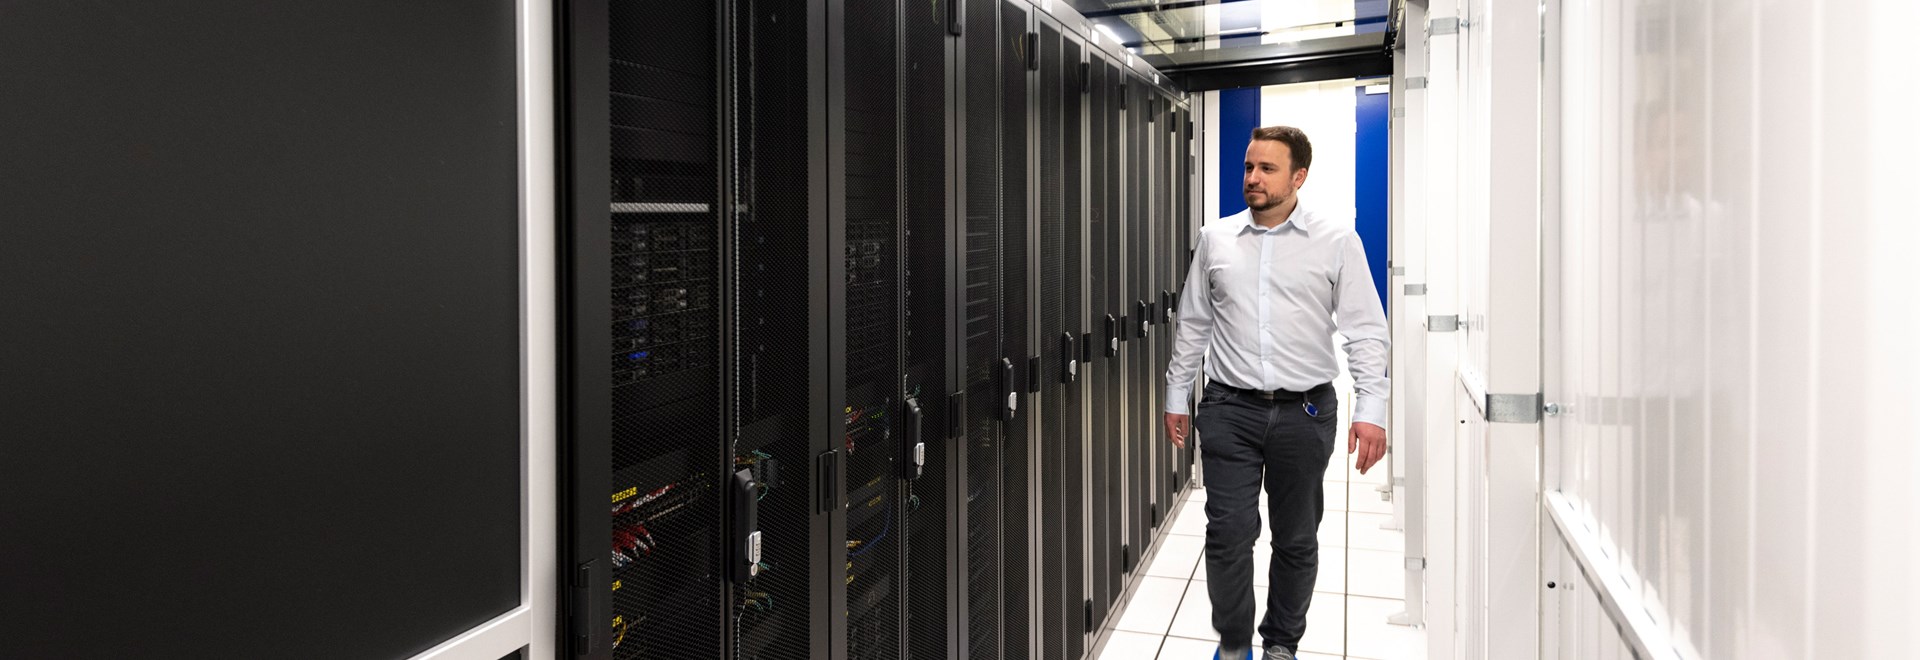 Need help rebuilding your IT infrastructure after a merger or acquisition?